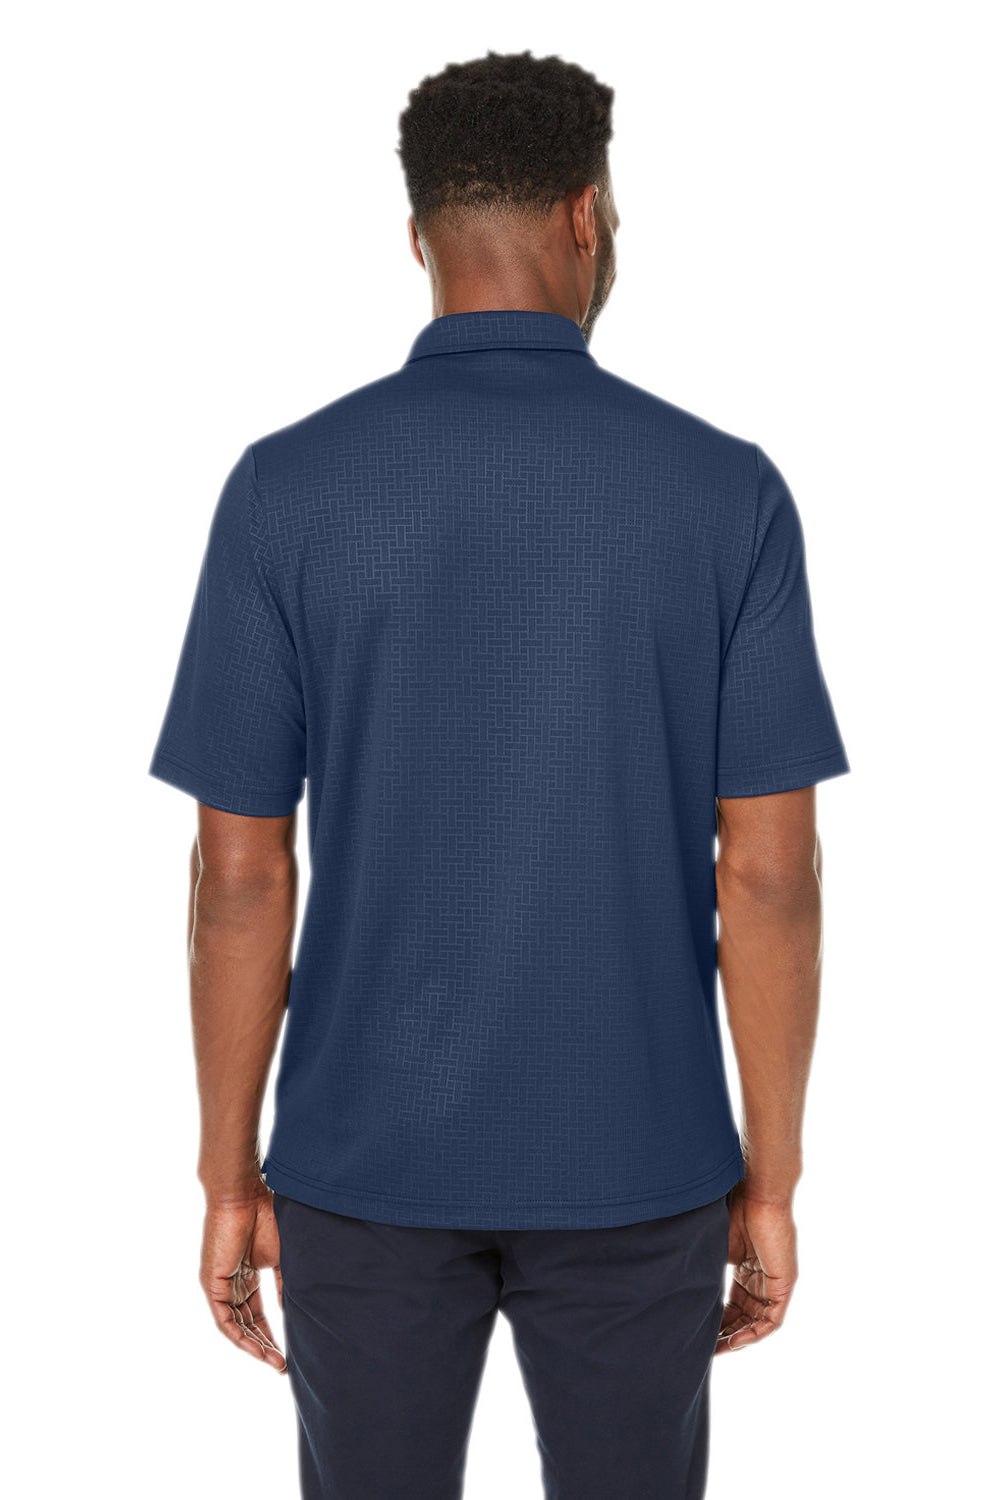 North End NE102 Mens Replay Recycled Short Sleeve Polo Shirt Classic Navy Blue Back